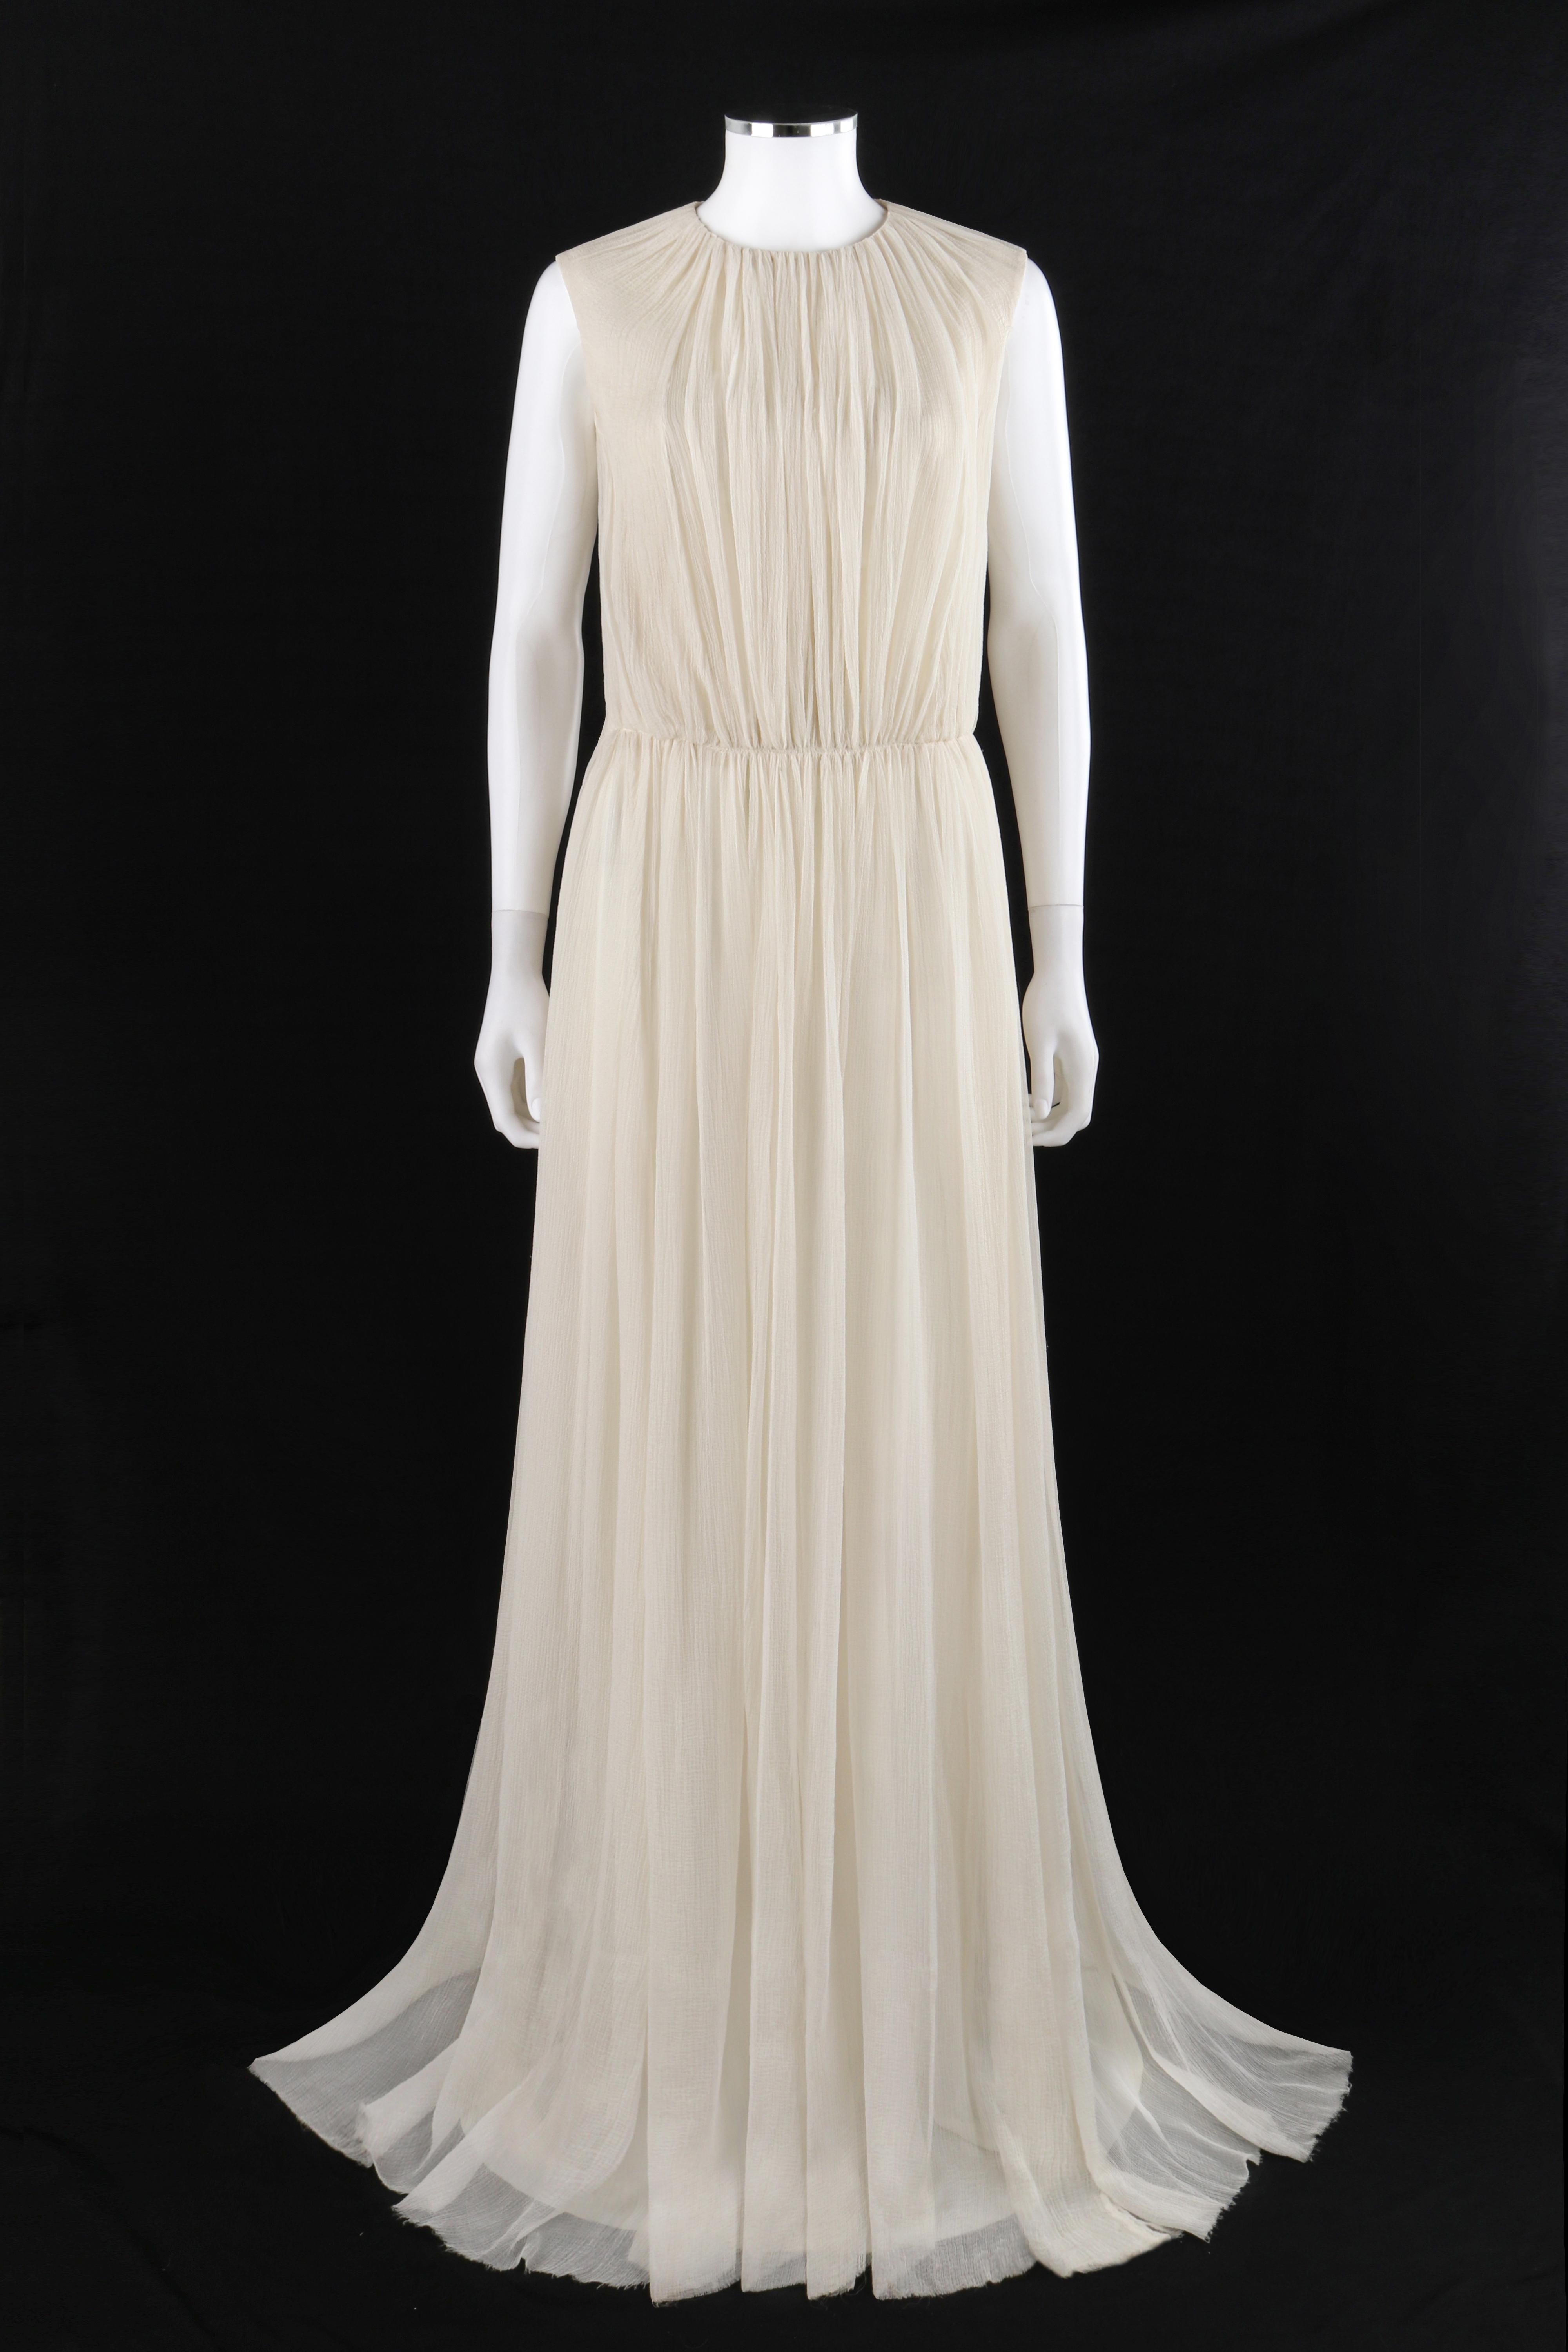 ALEXANDER McQUEEN S/S 2007 Ivory Silk Chiffon Gathered Full Length Ballgown
 
Brand / Manufacturer: Alexander McQueen 
Collection: S/S 2007
Style: Ballgown
Color(s): Shades of ivory
Lined: Yes
Unmarked Fabric Content: 100% Silk
Additional Details /